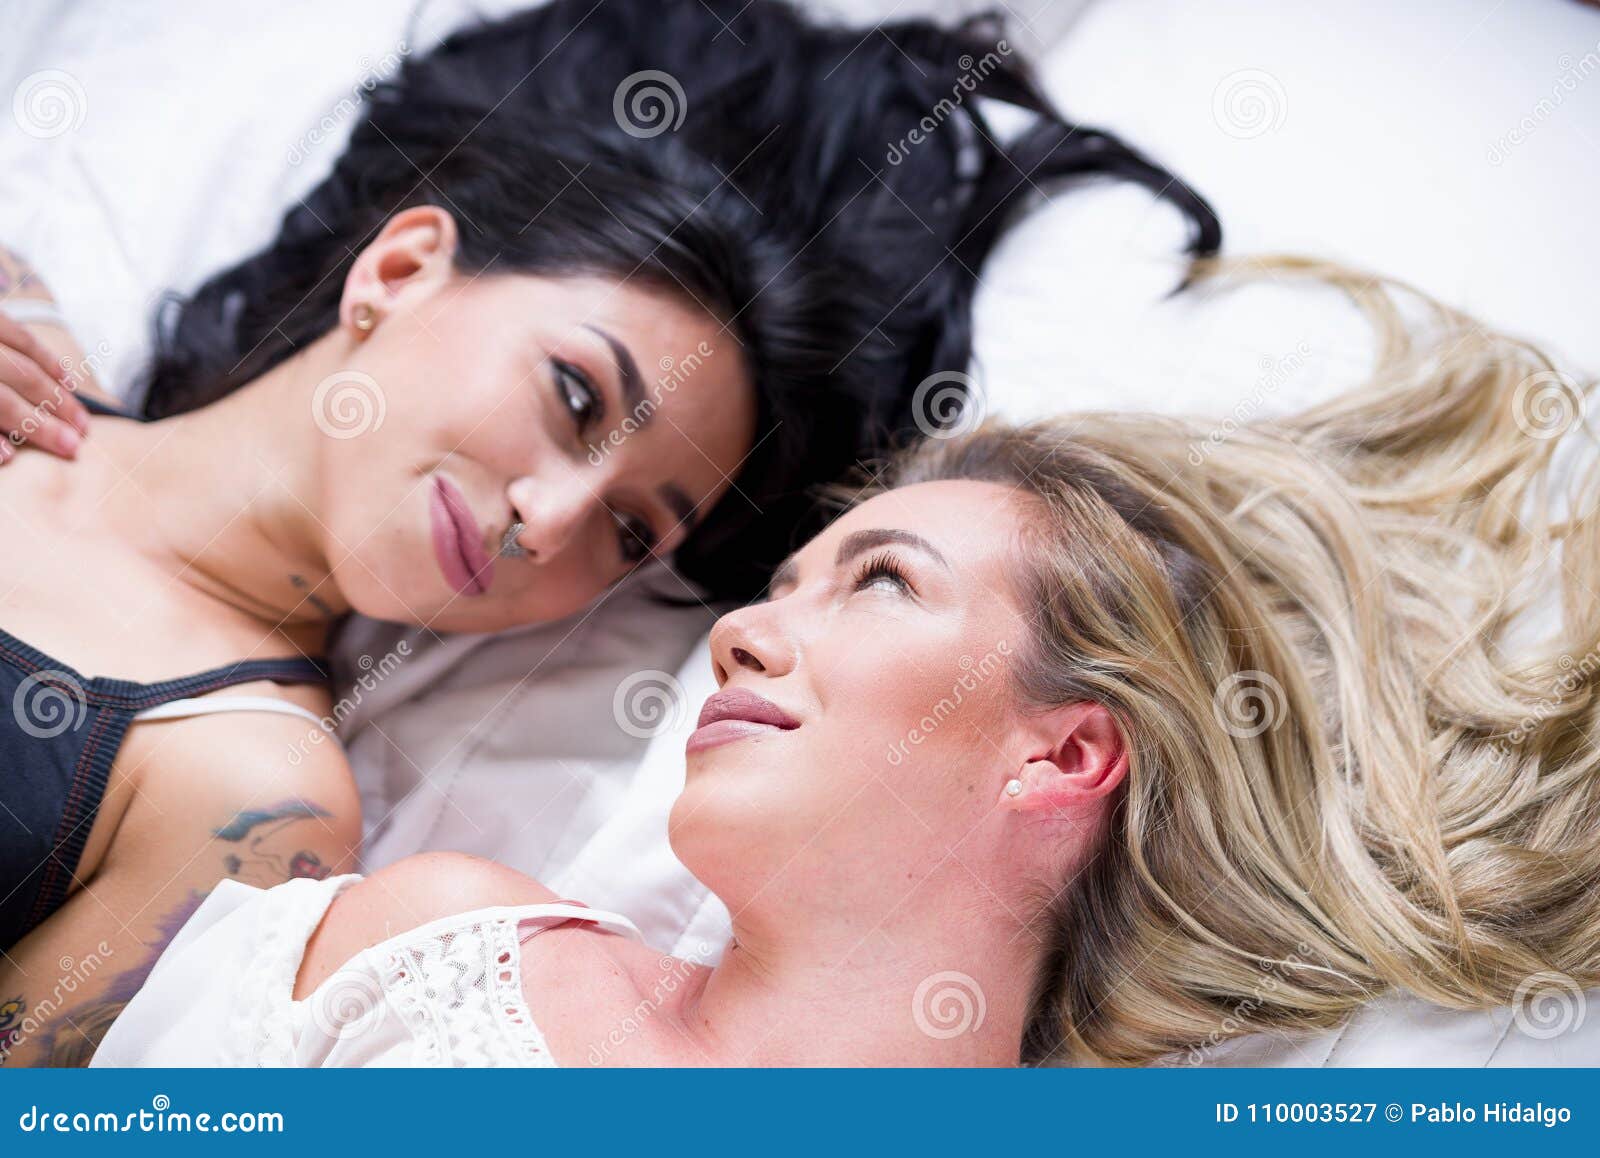 Beautiful Lesbians Lovers At Morning Laying In Bed Doing A Heart